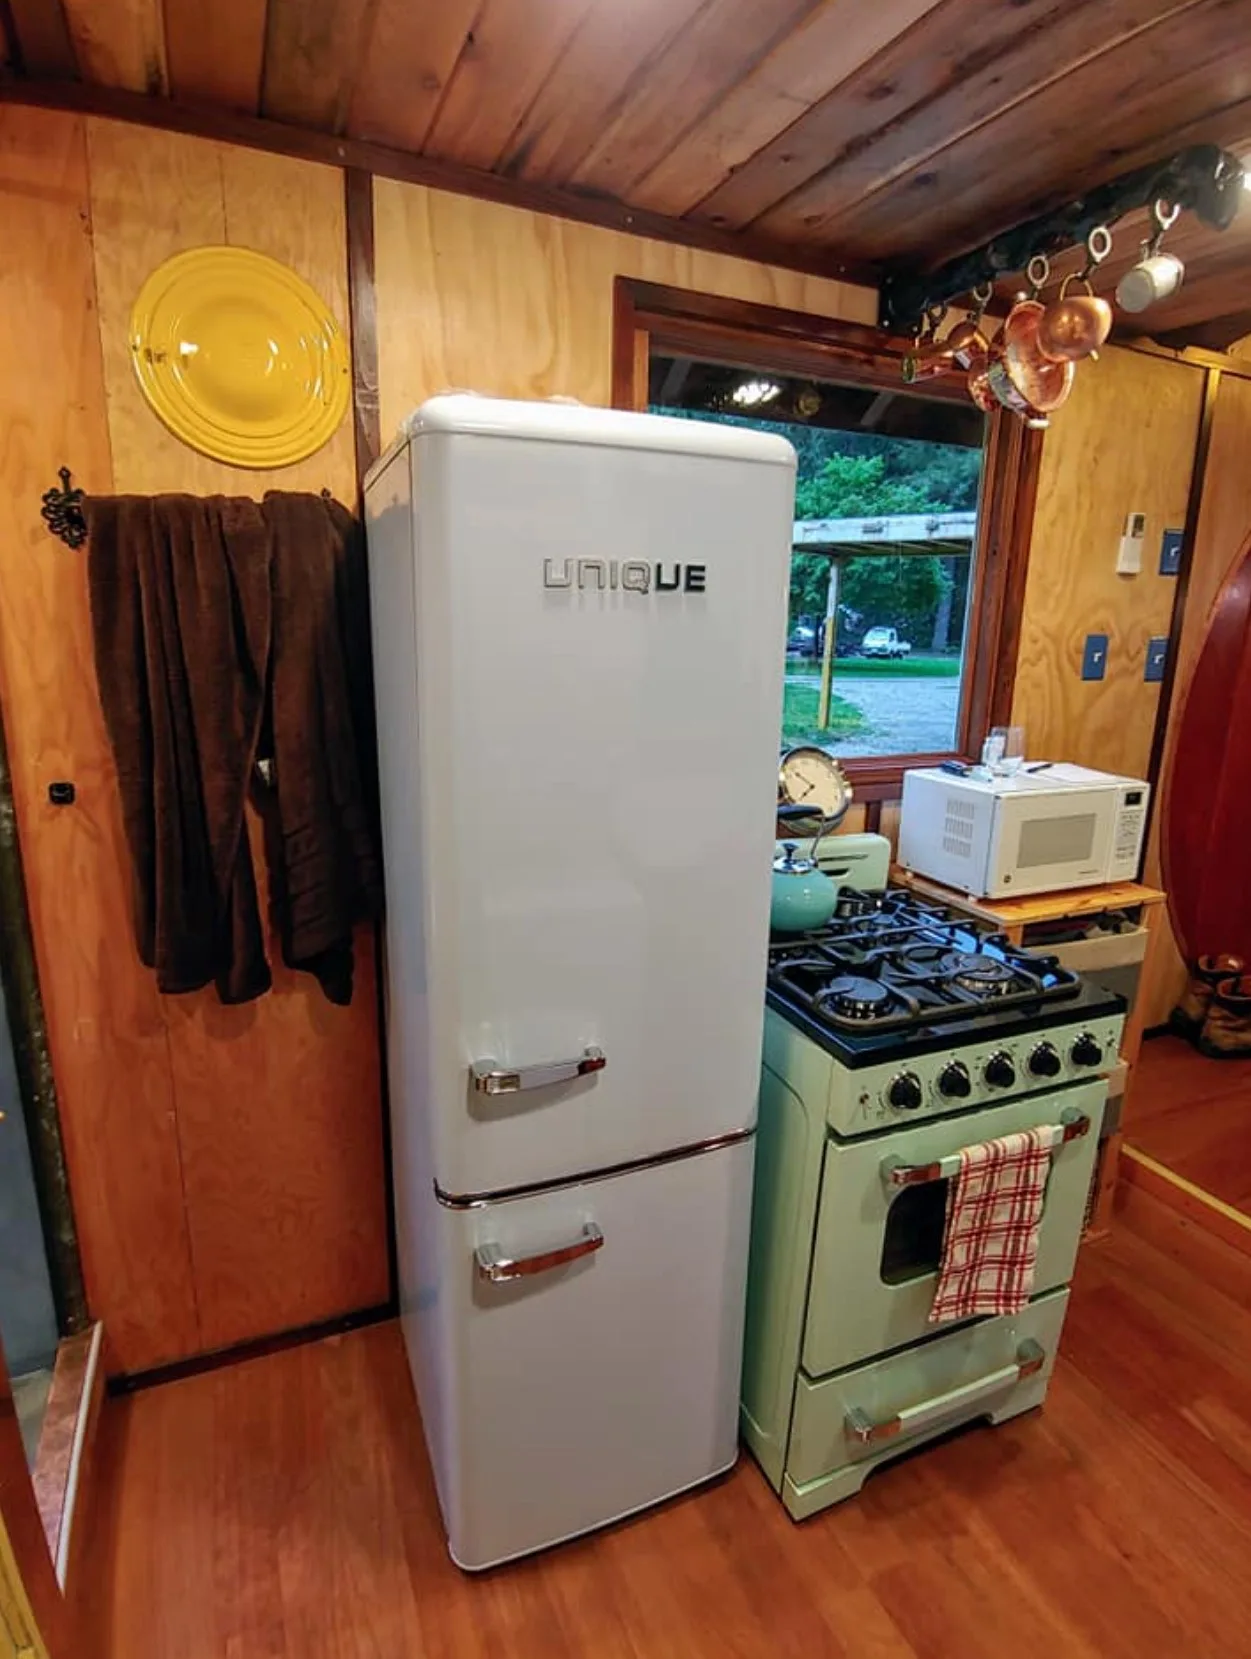 Two-door fride at the tiny house, sitting next to the stove.